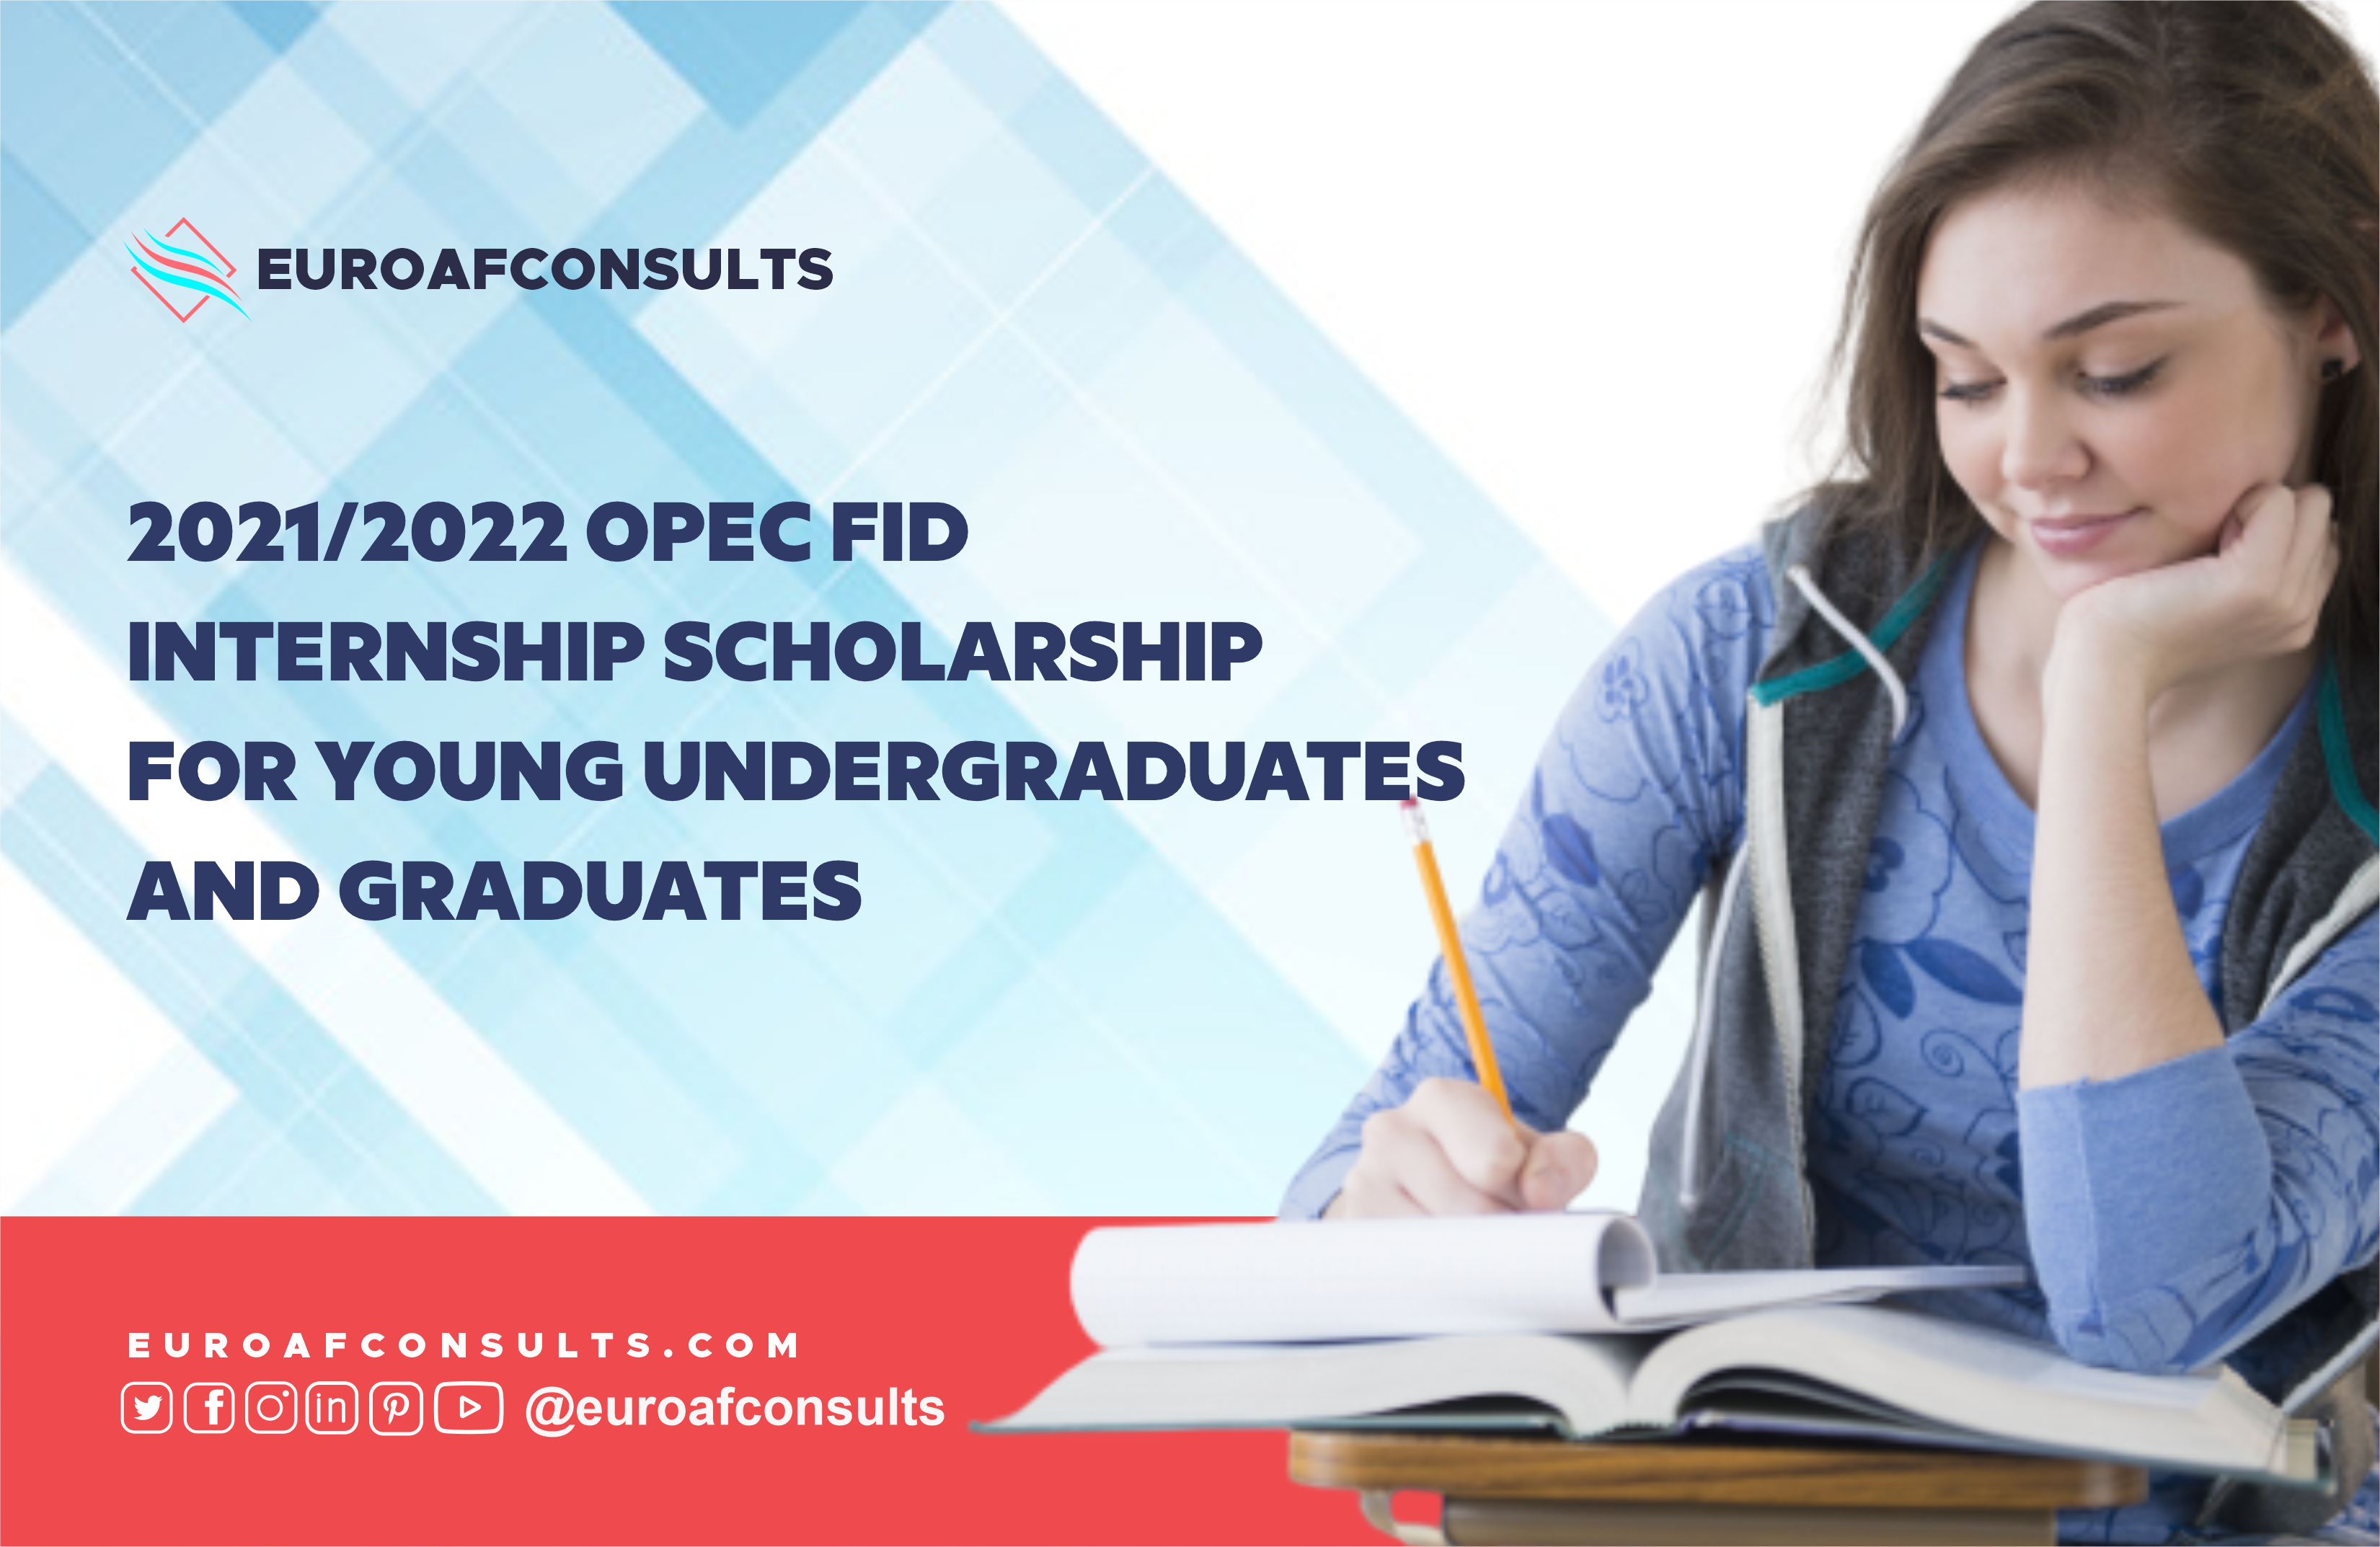 You are currently viewing OPEC FID scholarship 2021 application portal For Undergraduates and Graduates